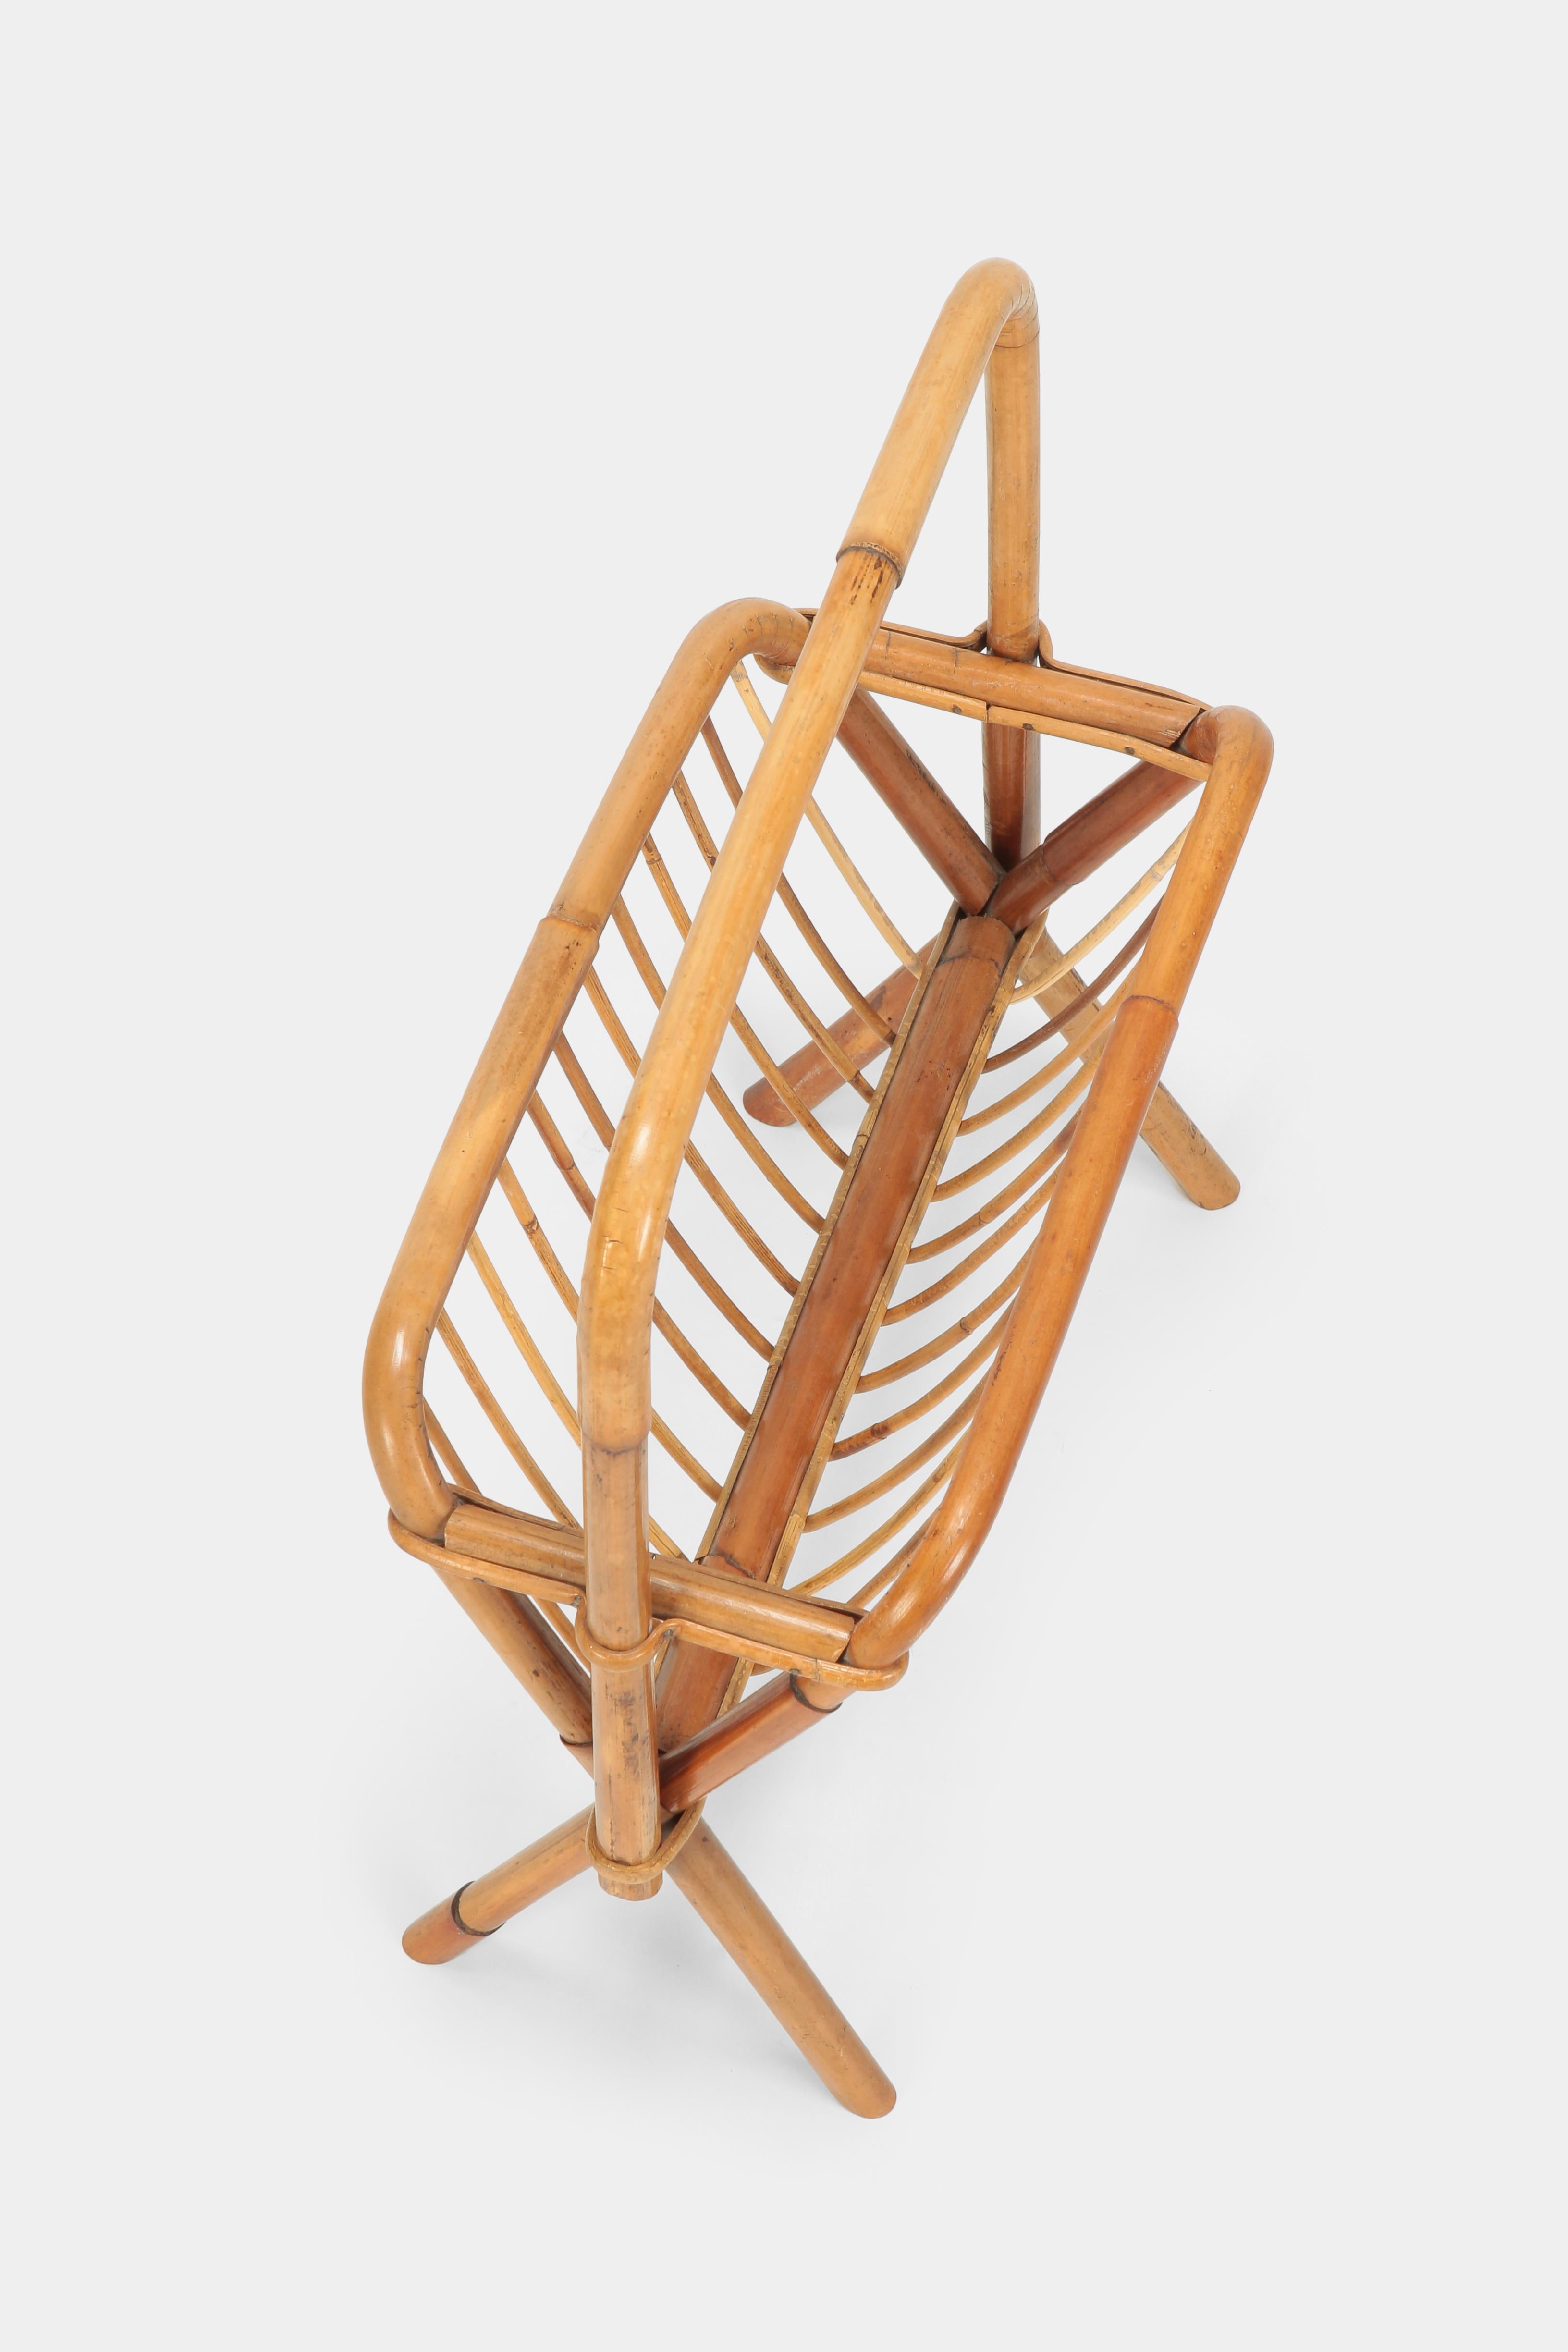 Magazine rack manufactured by Bonvicino in the 1950s in Italy. Simple magazine rack made of bent bamboo.
 